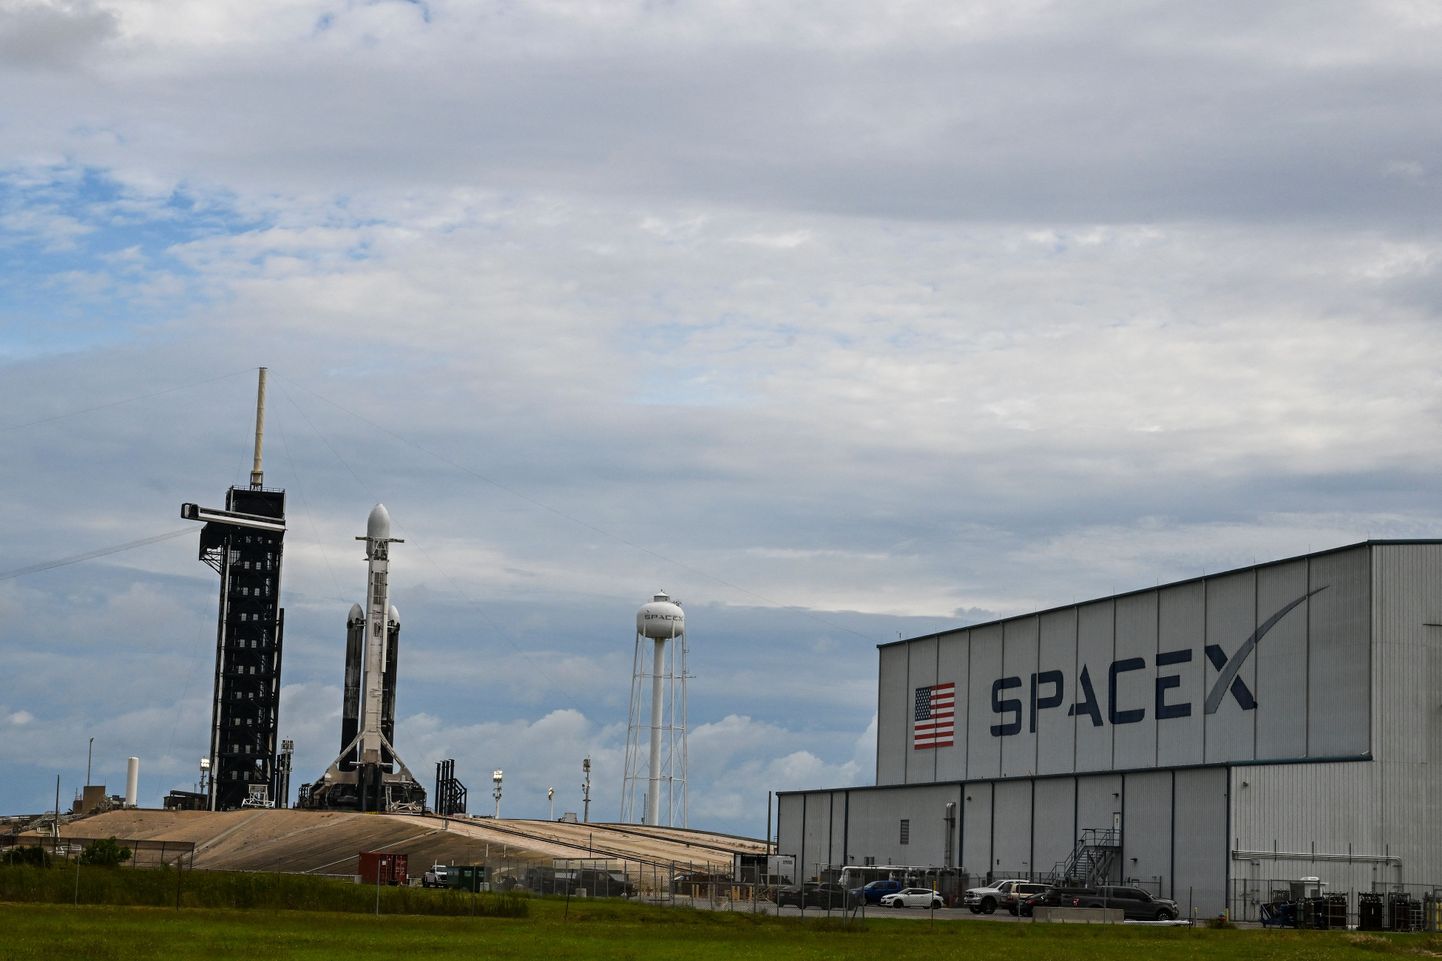 A SpaceX Falcon Heavy rocket with the Psyche spacecraft sits on launch pad 39A at NASA's Kennedy Space Center in Cape Canaveral, Florida, on October 11, 2023. NASA and SpaceX are targeting October 12, 2023, at 10:16 a.m. EDT for launch of the Psyche mission from Kennedy Space Center to the main asteroid belt between Mars and Jupiter. (Photo by CHANDAN KHANNA / AFP)